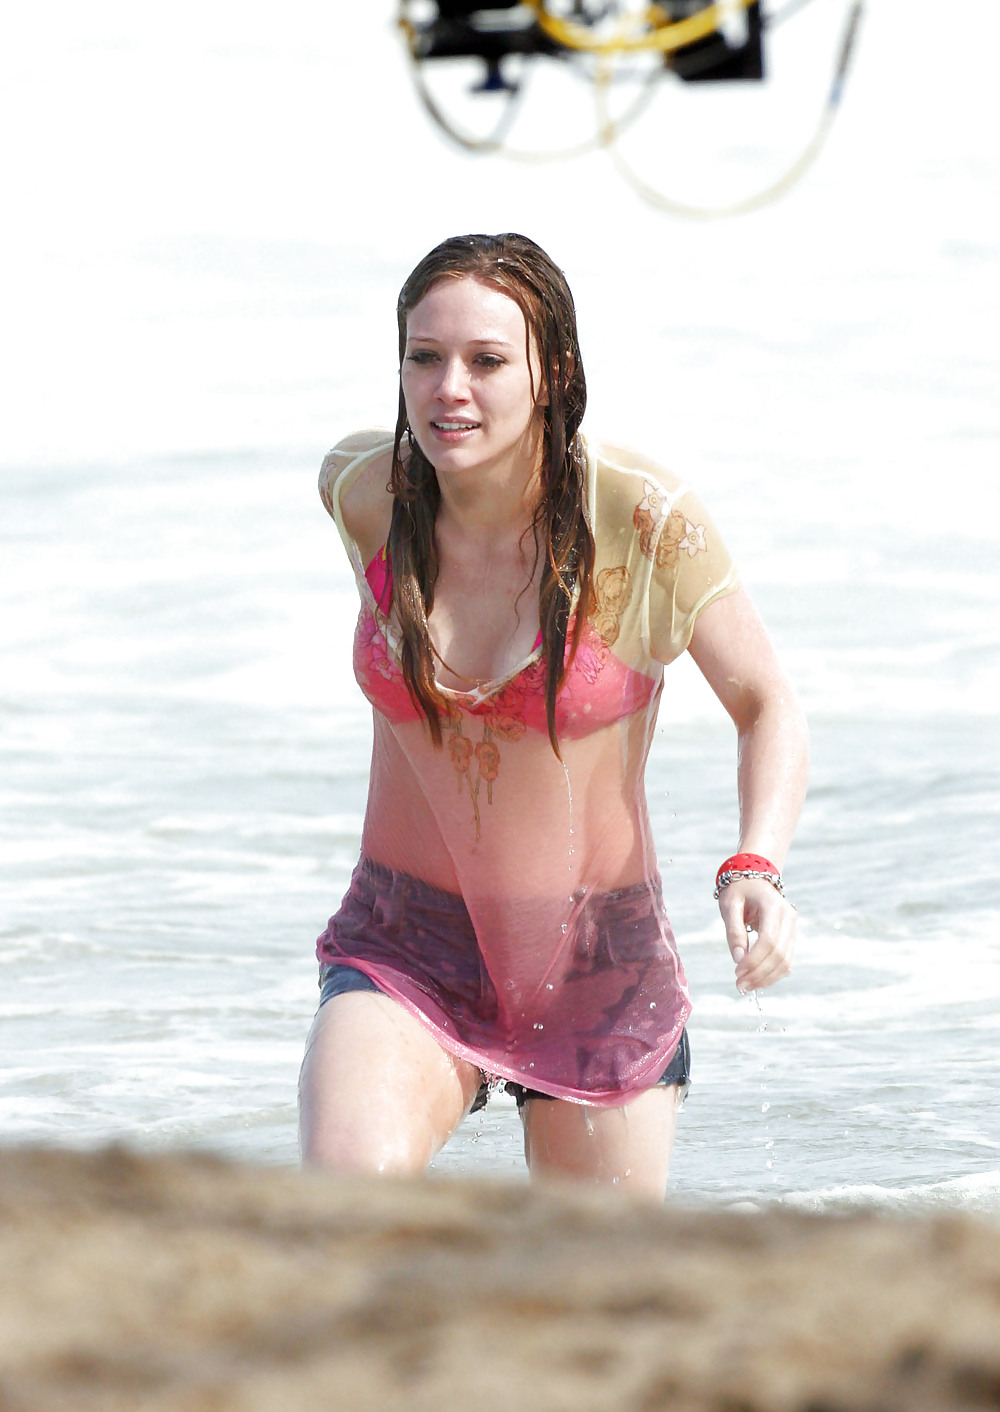 Hilary Duff at the Beach playing around in a wet shirt #7221009